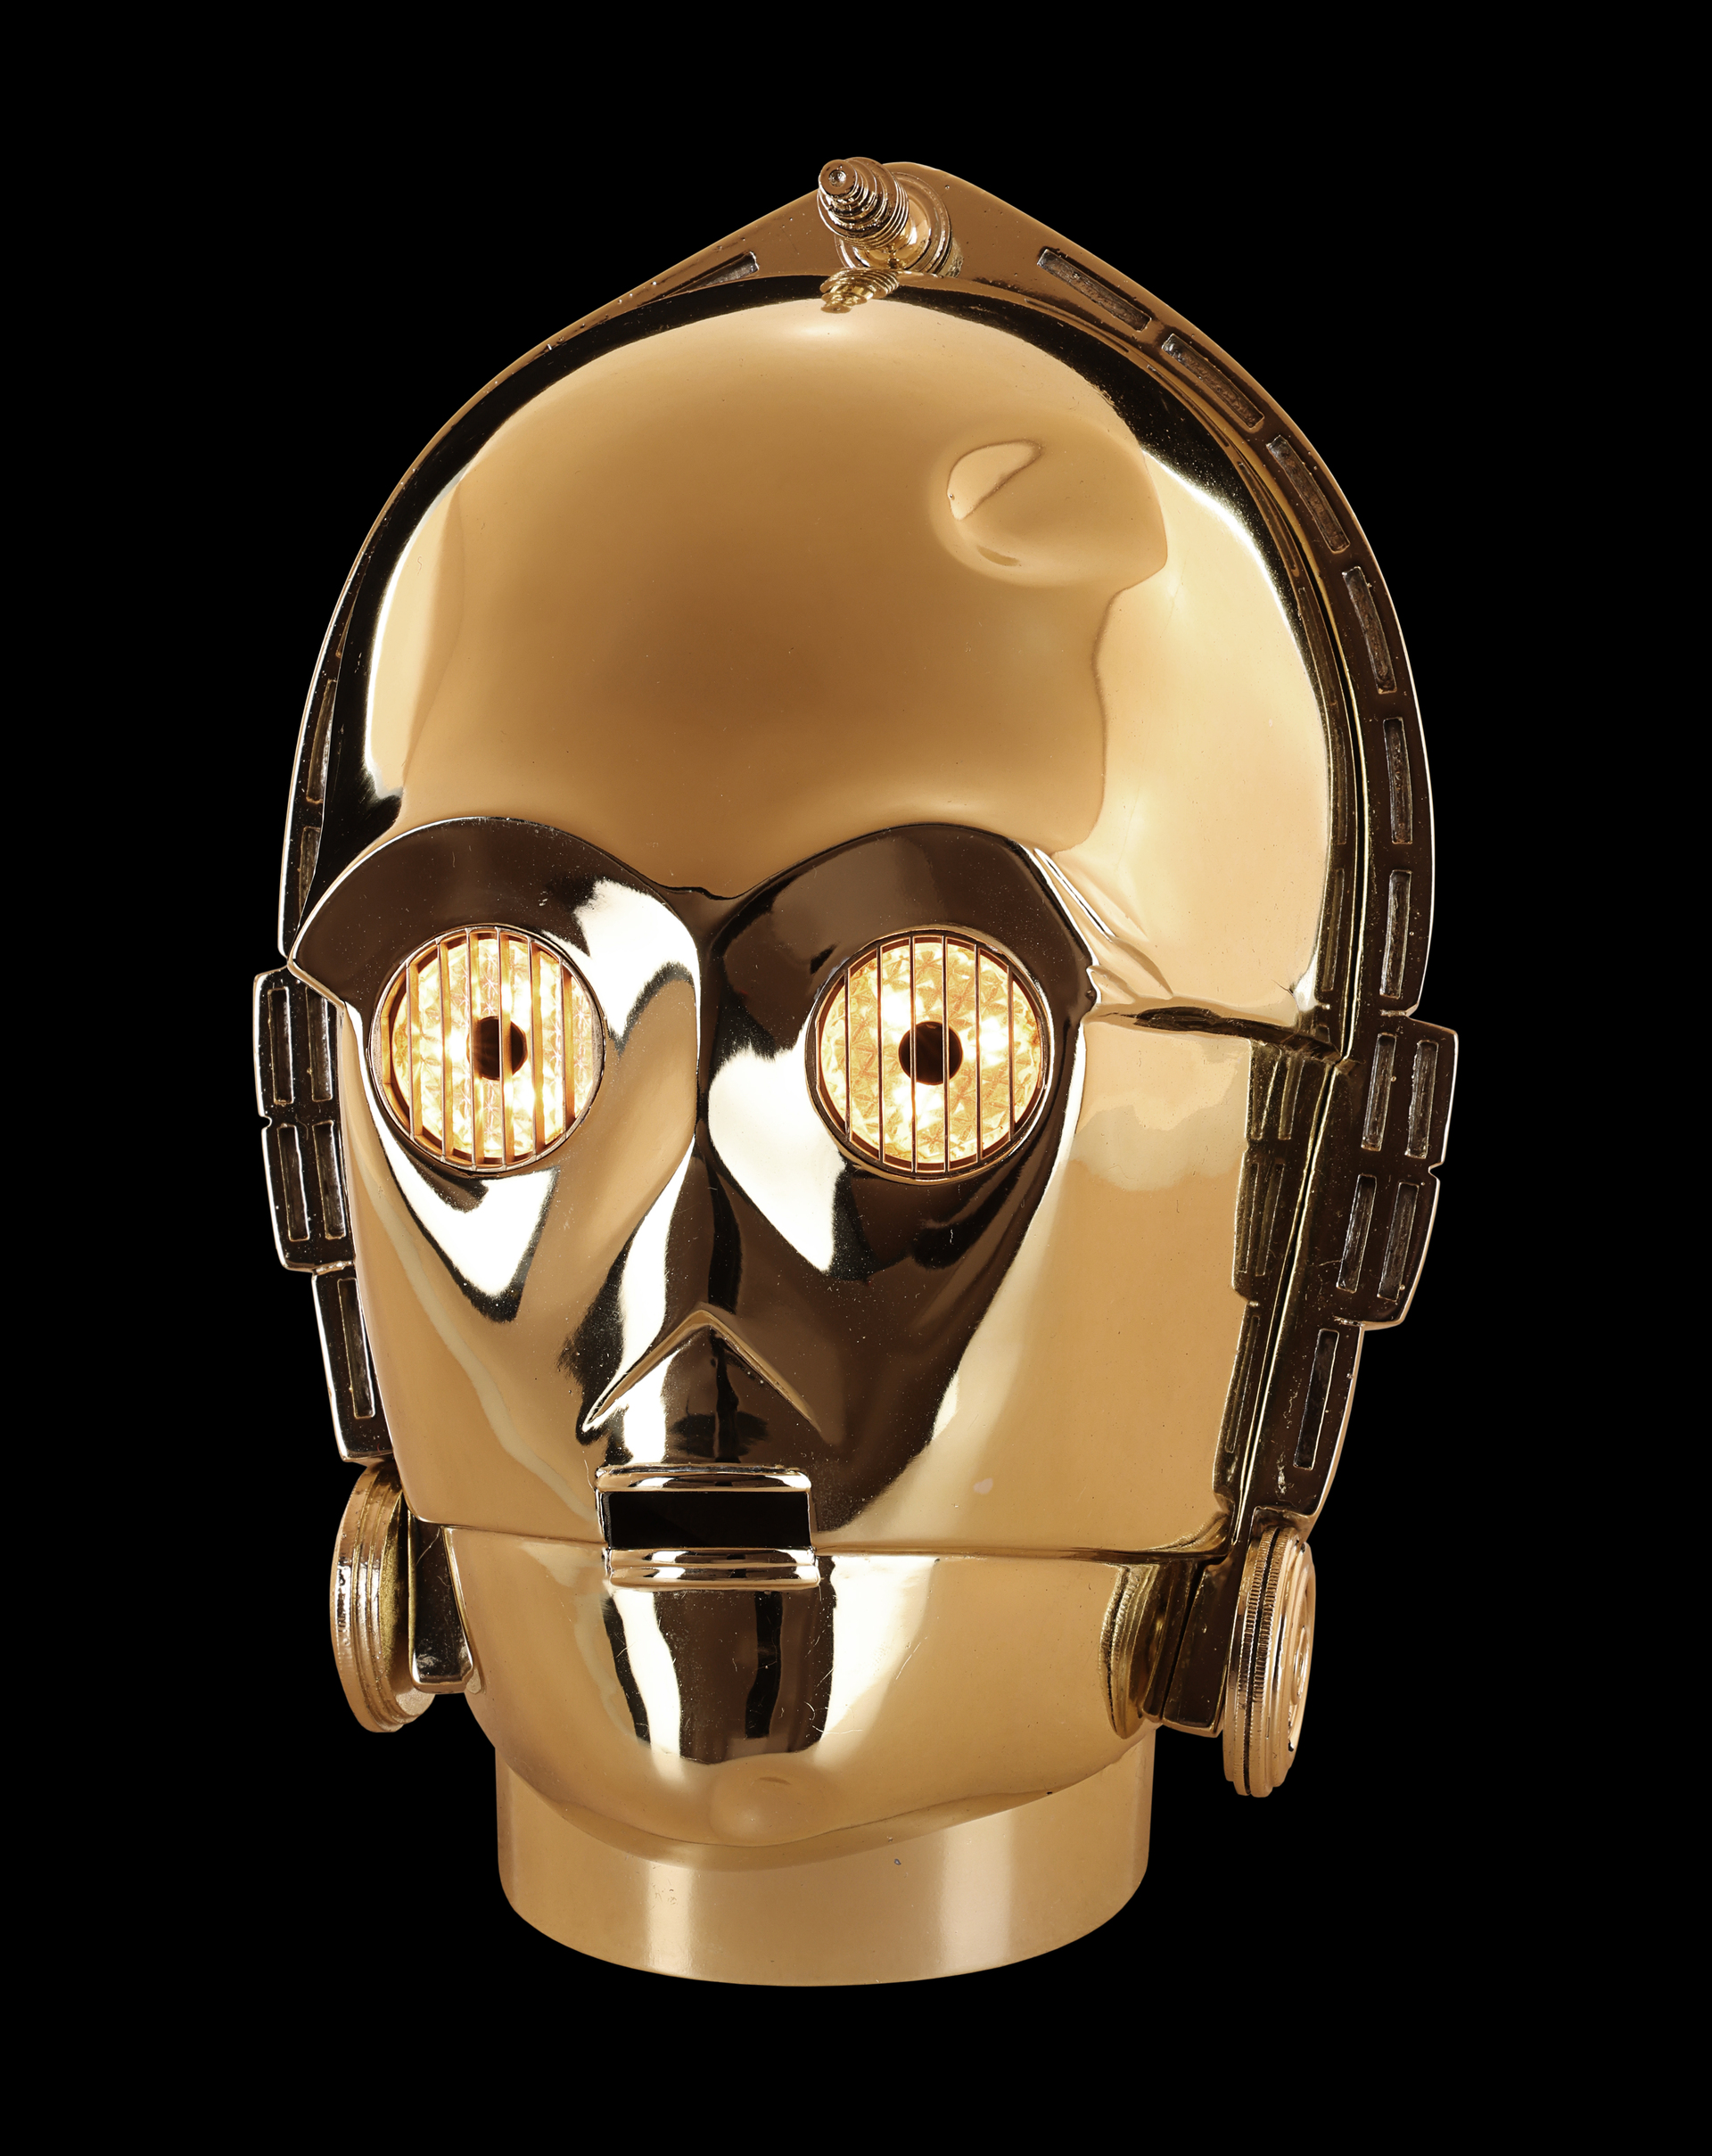 STAR WARS: A NEW HOPE (1977) - Anthony Daniels Collection: Screen-matched Light-up C-3PO (Anthony Da - Image 3 of 42